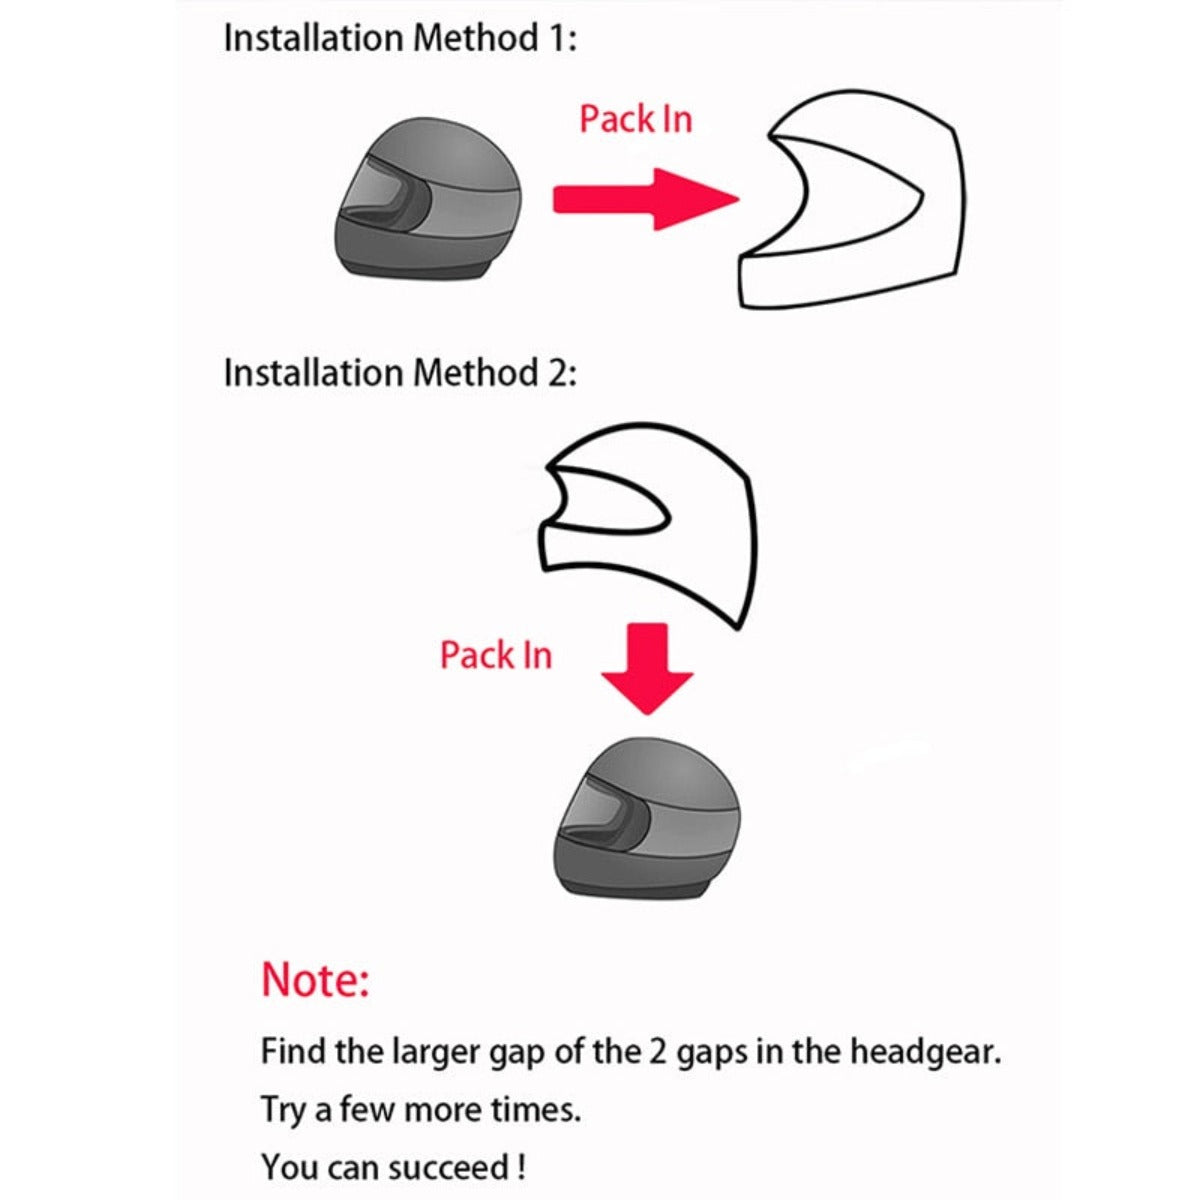 An attention-grabbing diagram demonstrating the cool installation process of a motorcycle helmet, complete with a Cool Motorcycle Helmet Cover - Turkey.